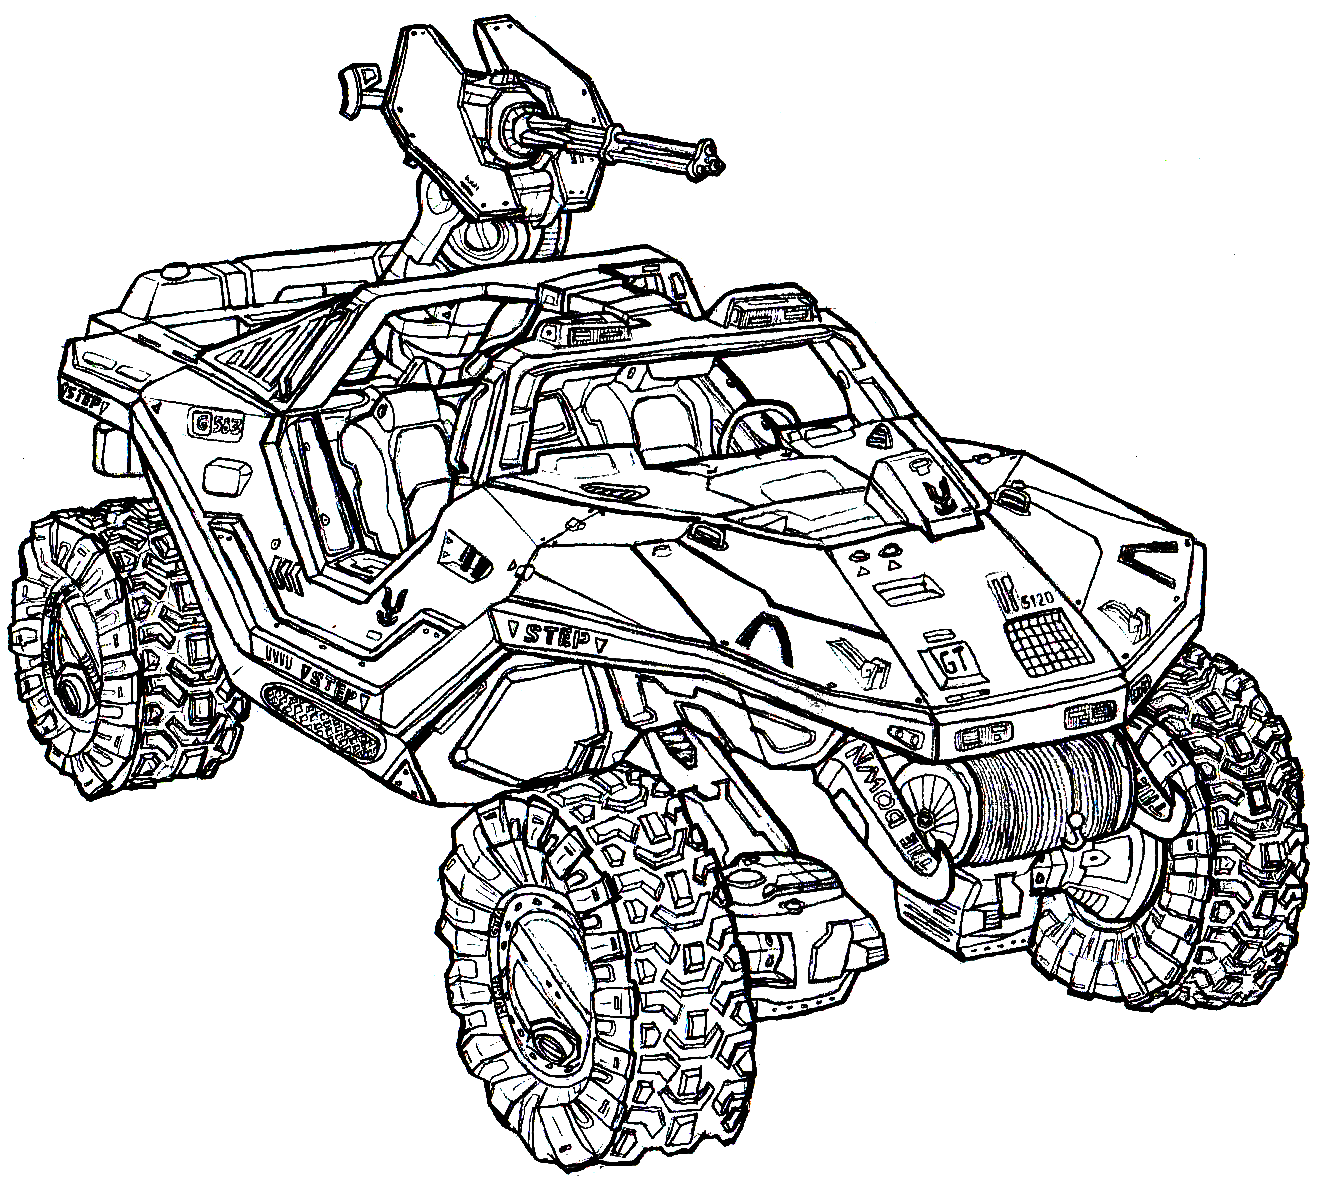 Halo 5 Coloring Pages Halo Coloring Pages Halo 5 Coloring Pictures ...